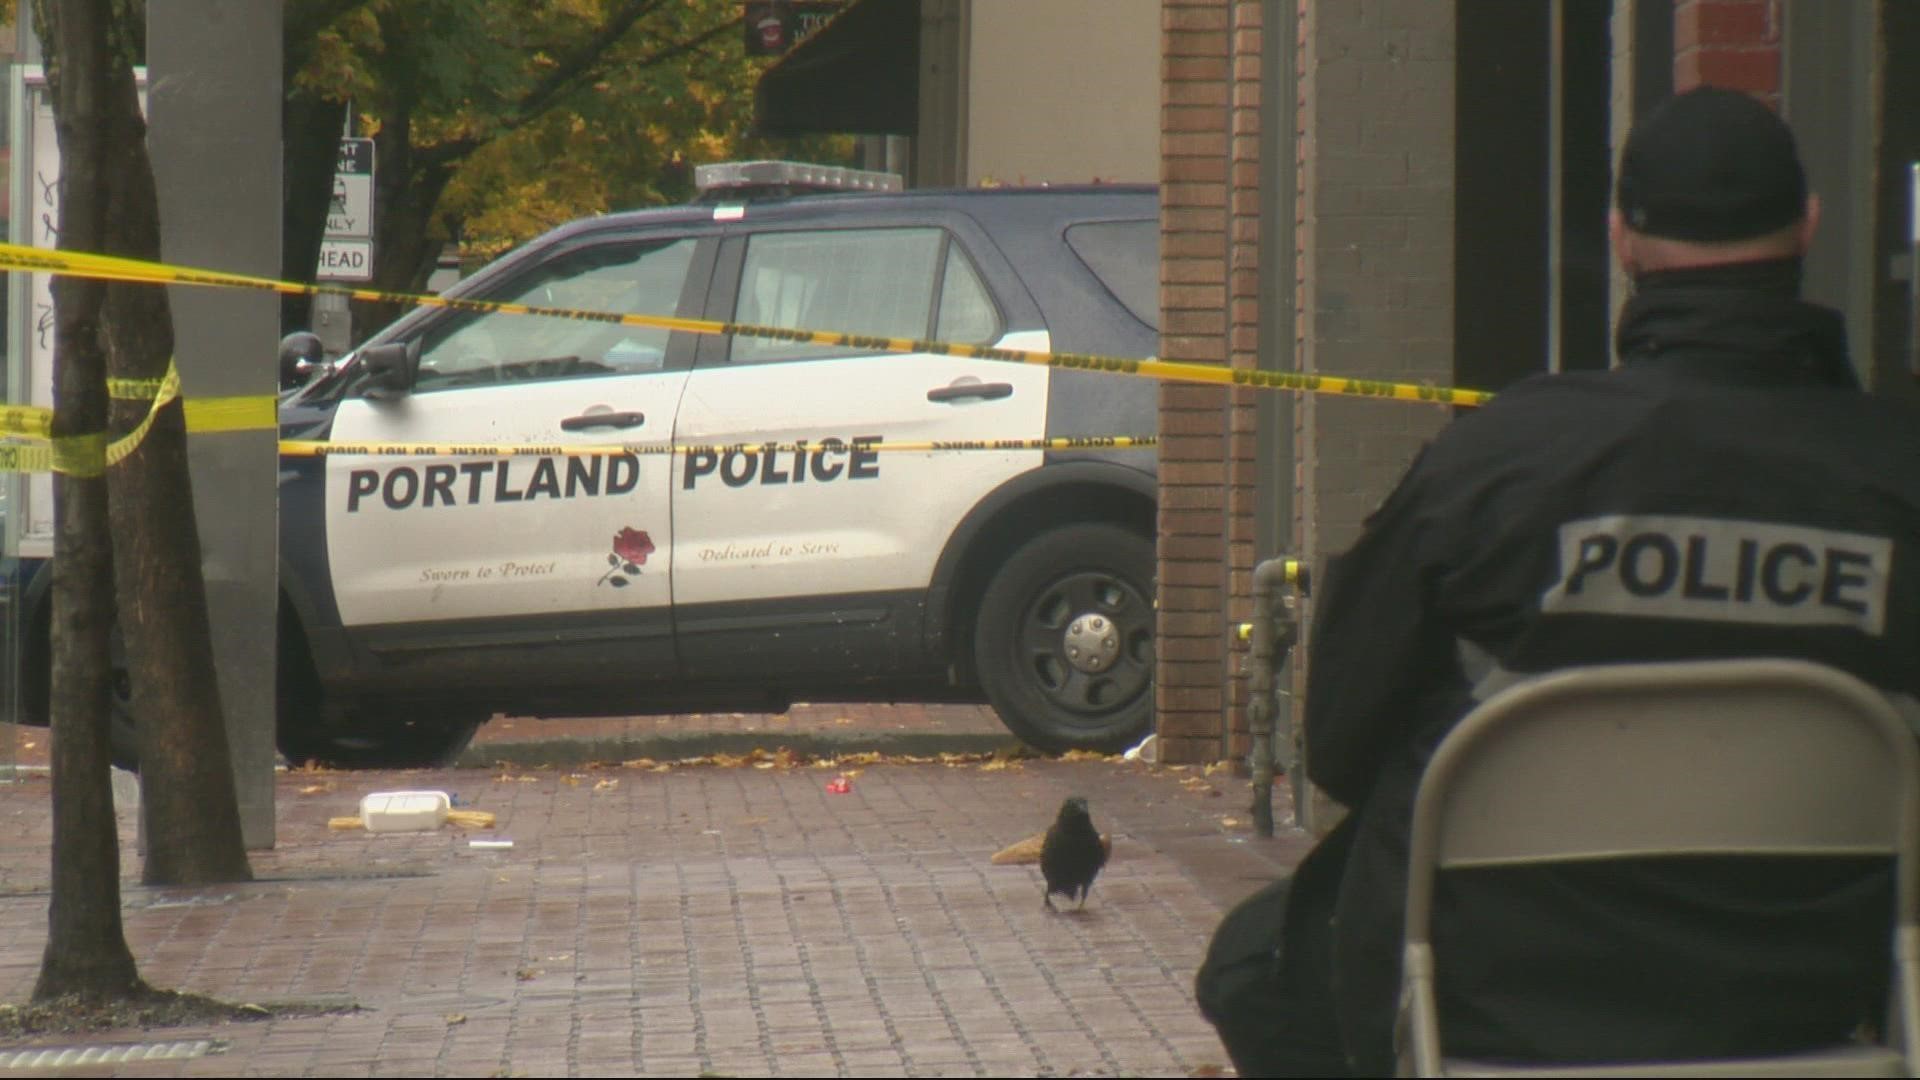 Portland has experienced more than 1,040 shootings this year and 72 homicides. The most recent two occurred this past weekend.